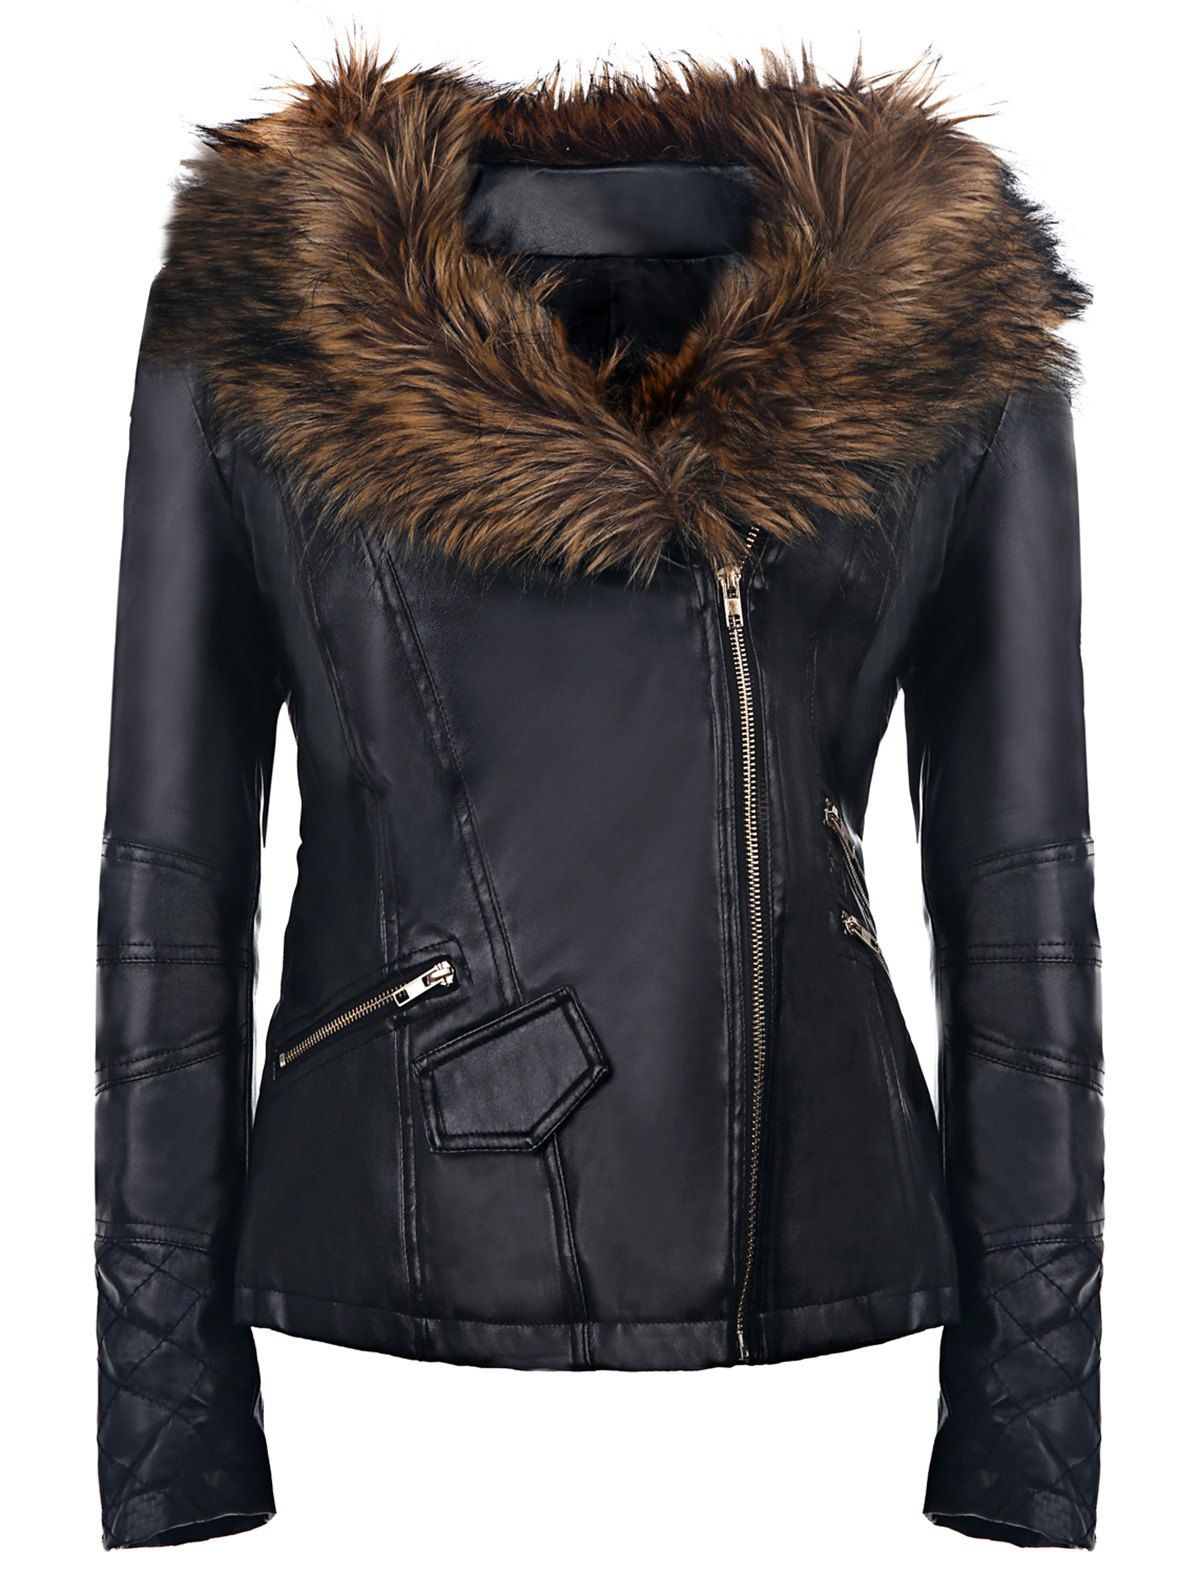 [30% OFF] Long Sleeve Faux Leather Jacket With Fur Collar | Rosegal